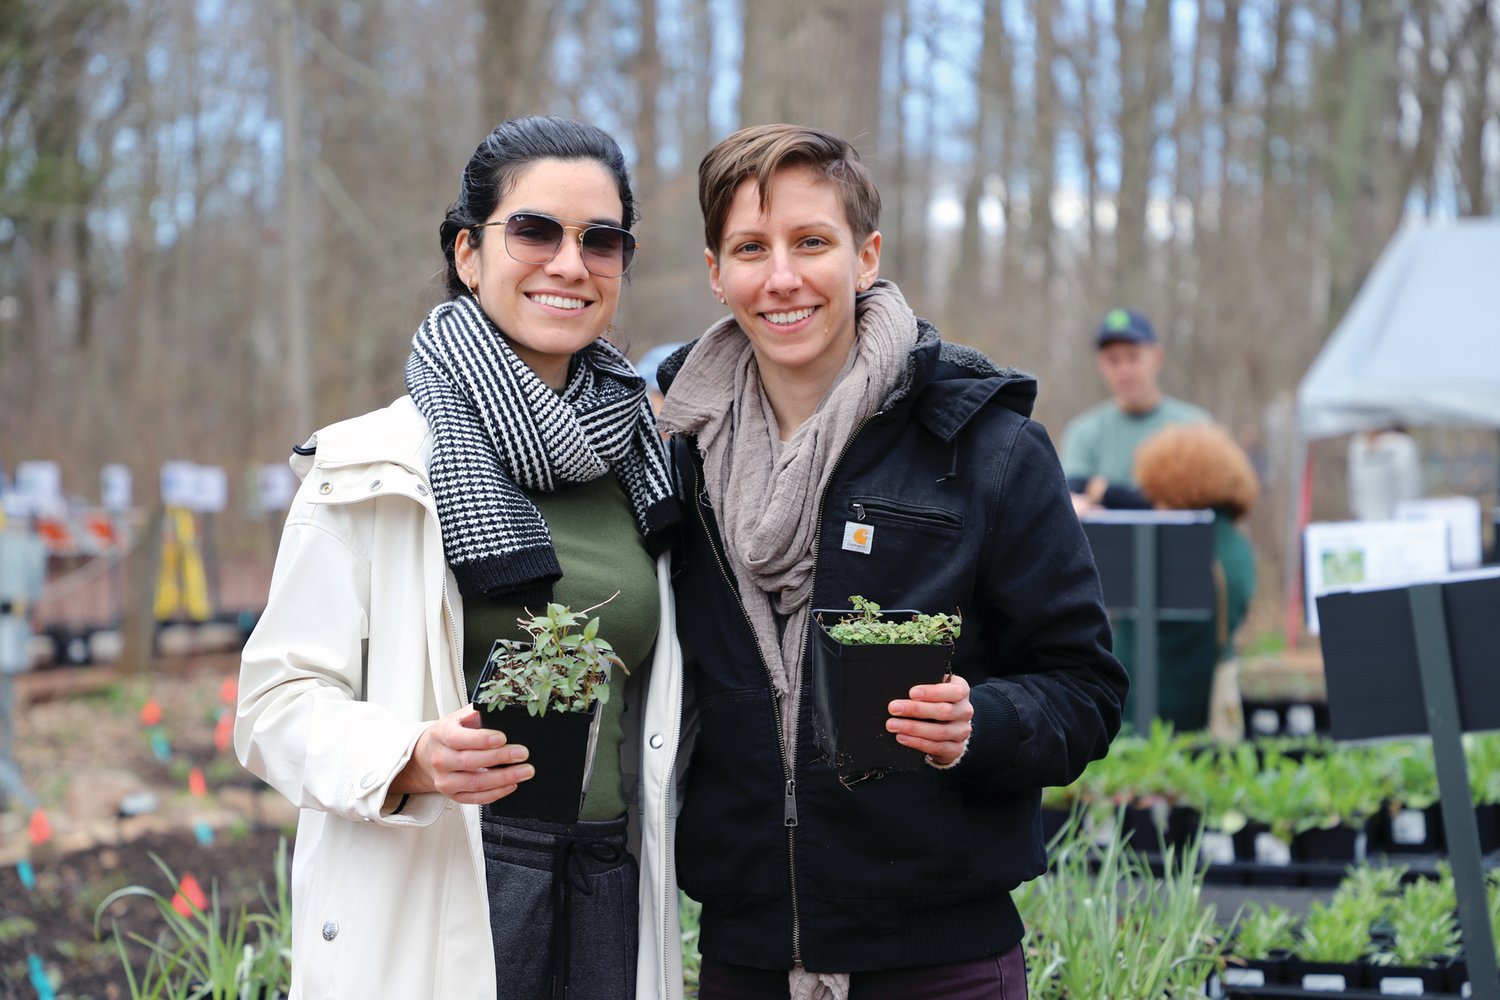 Shop local and support the environment all in one trip at Bowman’s Hill Wildflower Preserve’s Native Plant Nursery, officially open for the season on April 14.